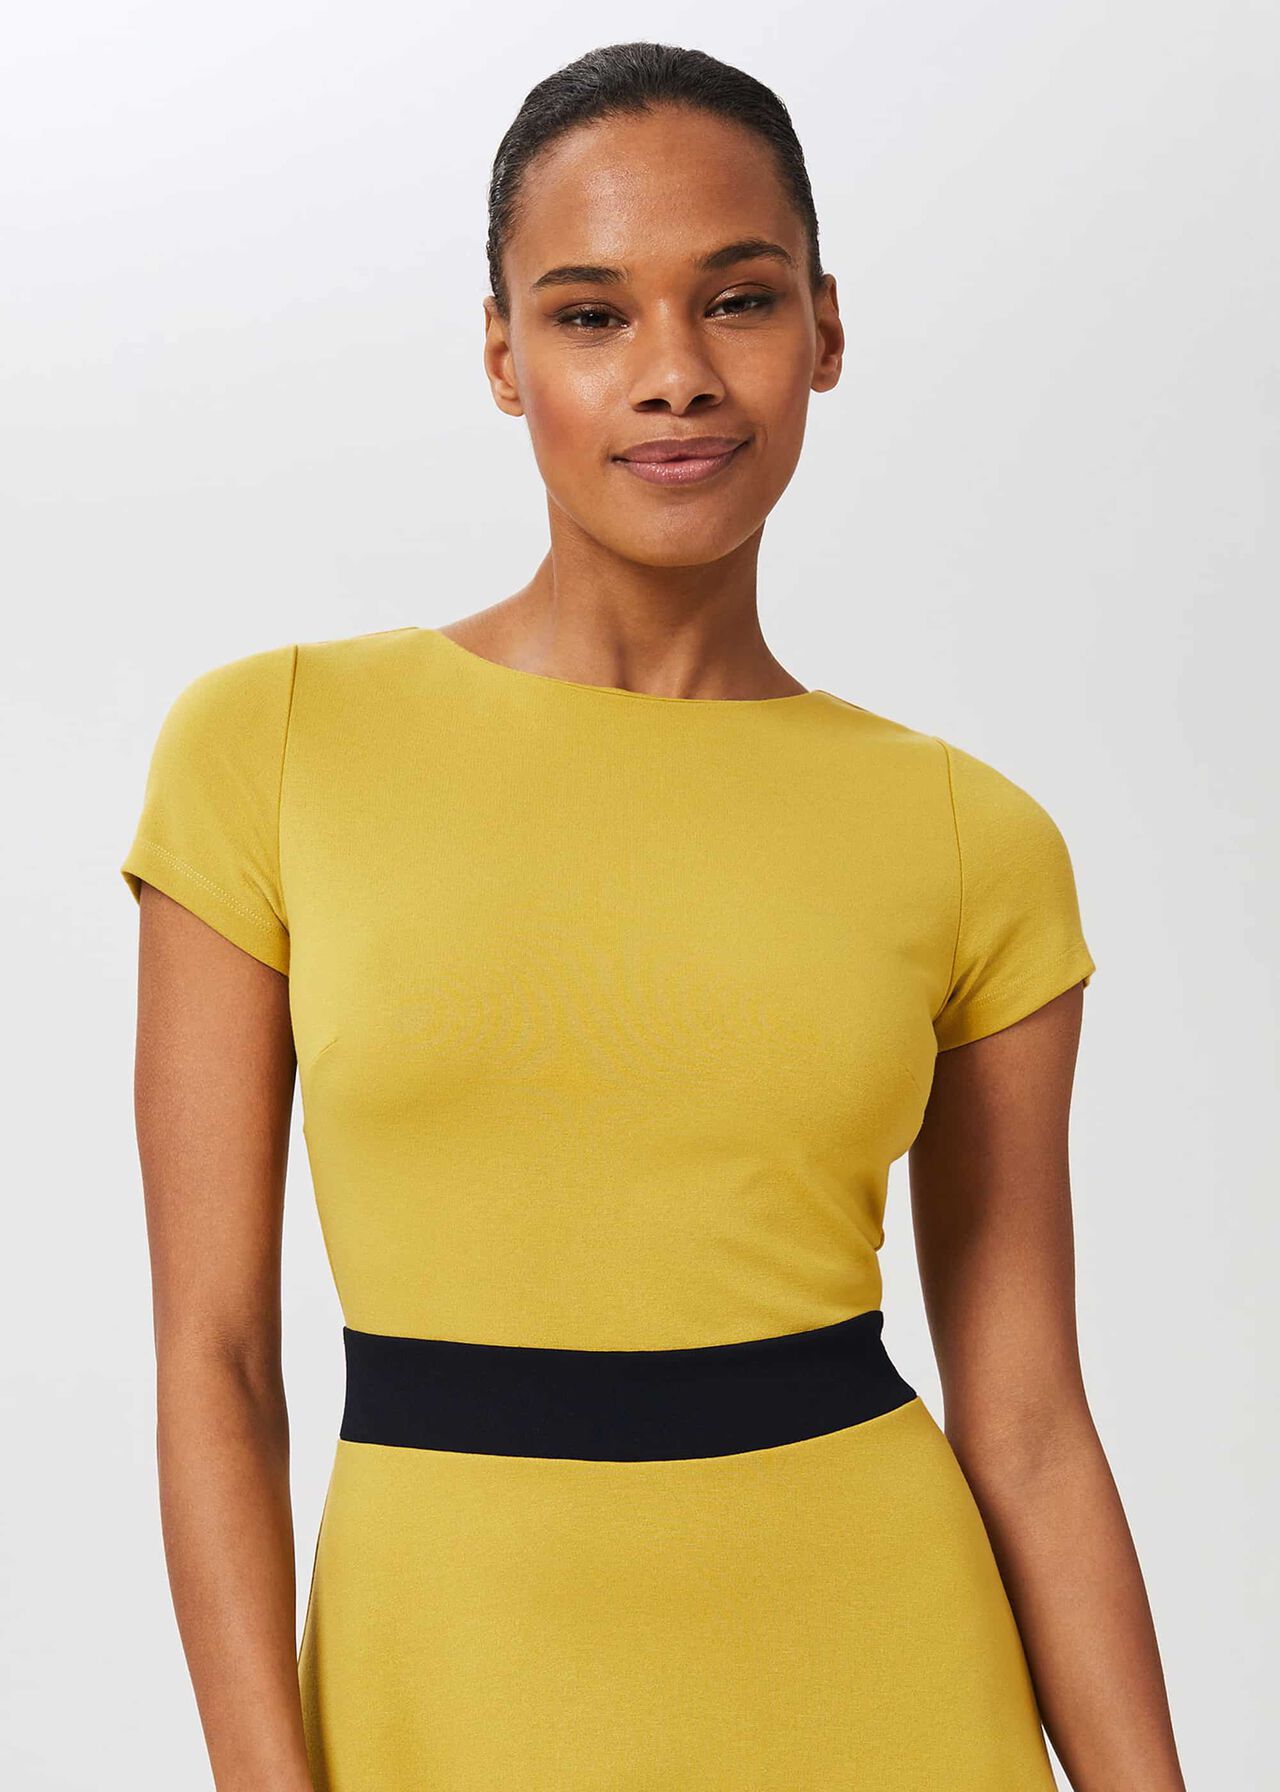 Seasalter Jersey Fit And Flare Dress, Yellow Nvy Whte, hi-res